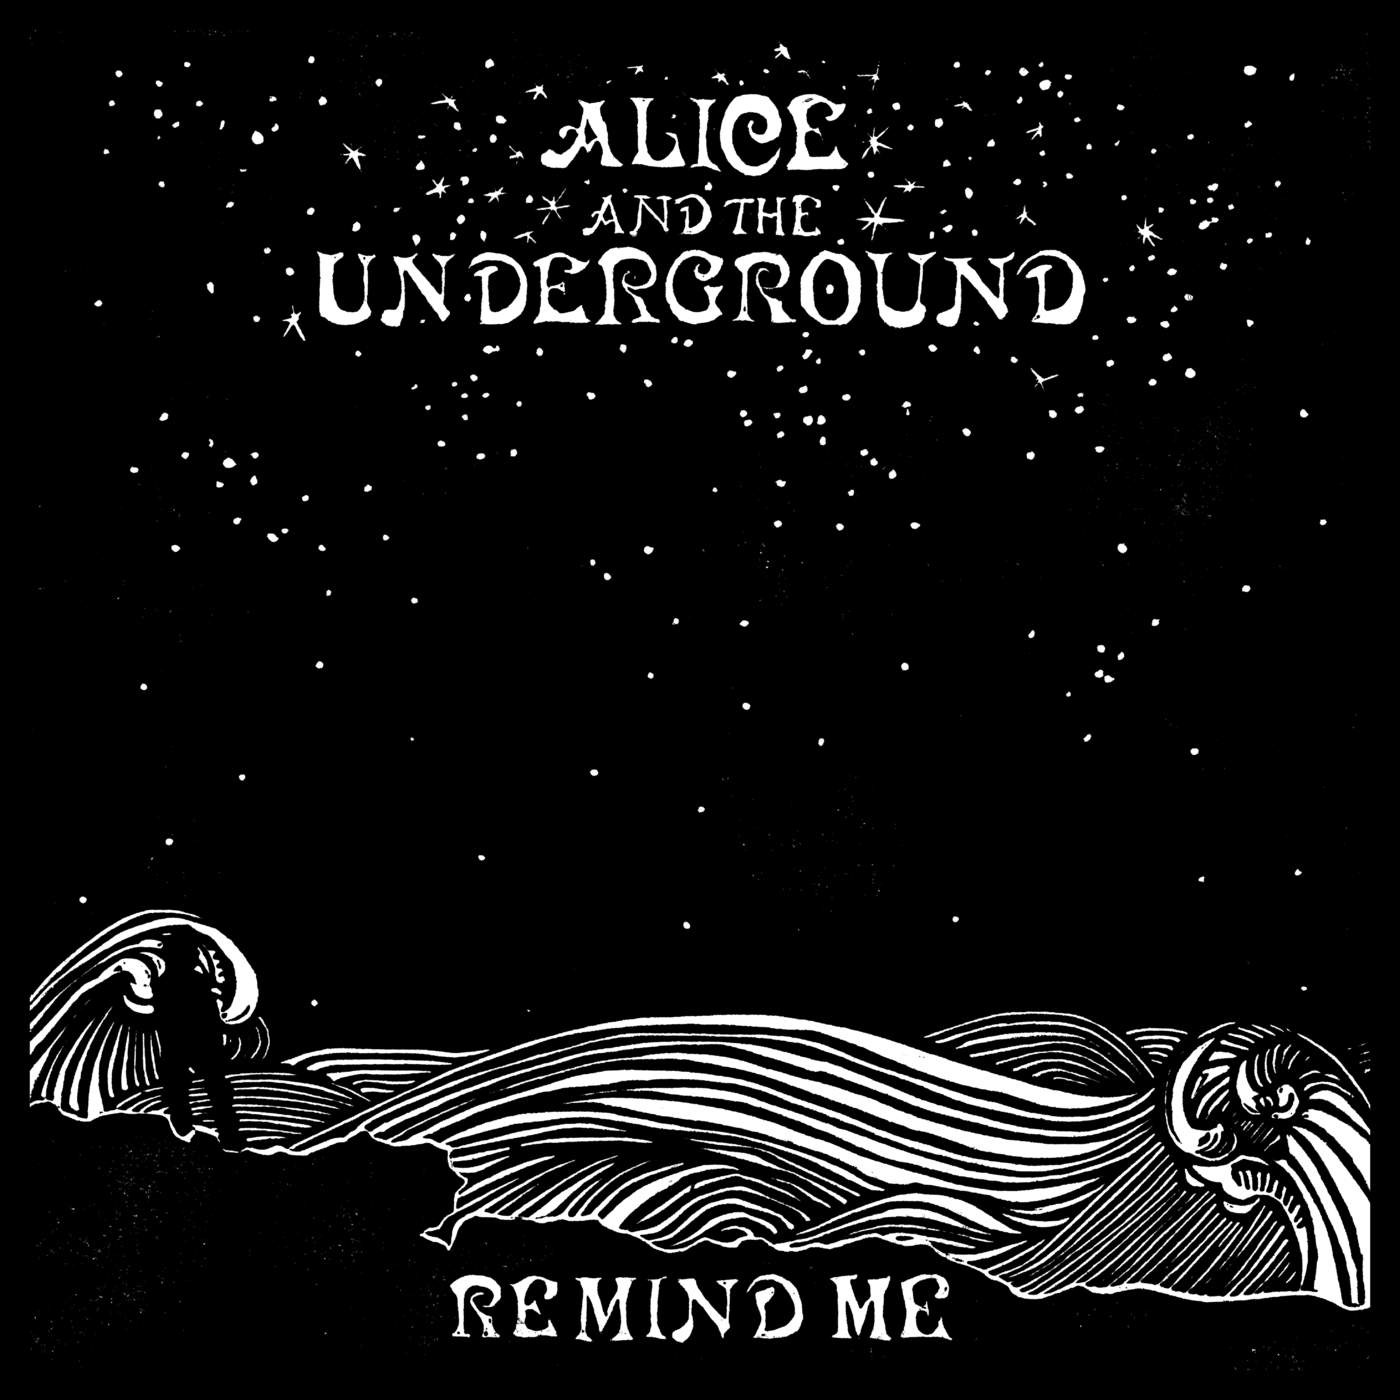 Art for Remind Me by Alice and the Underground